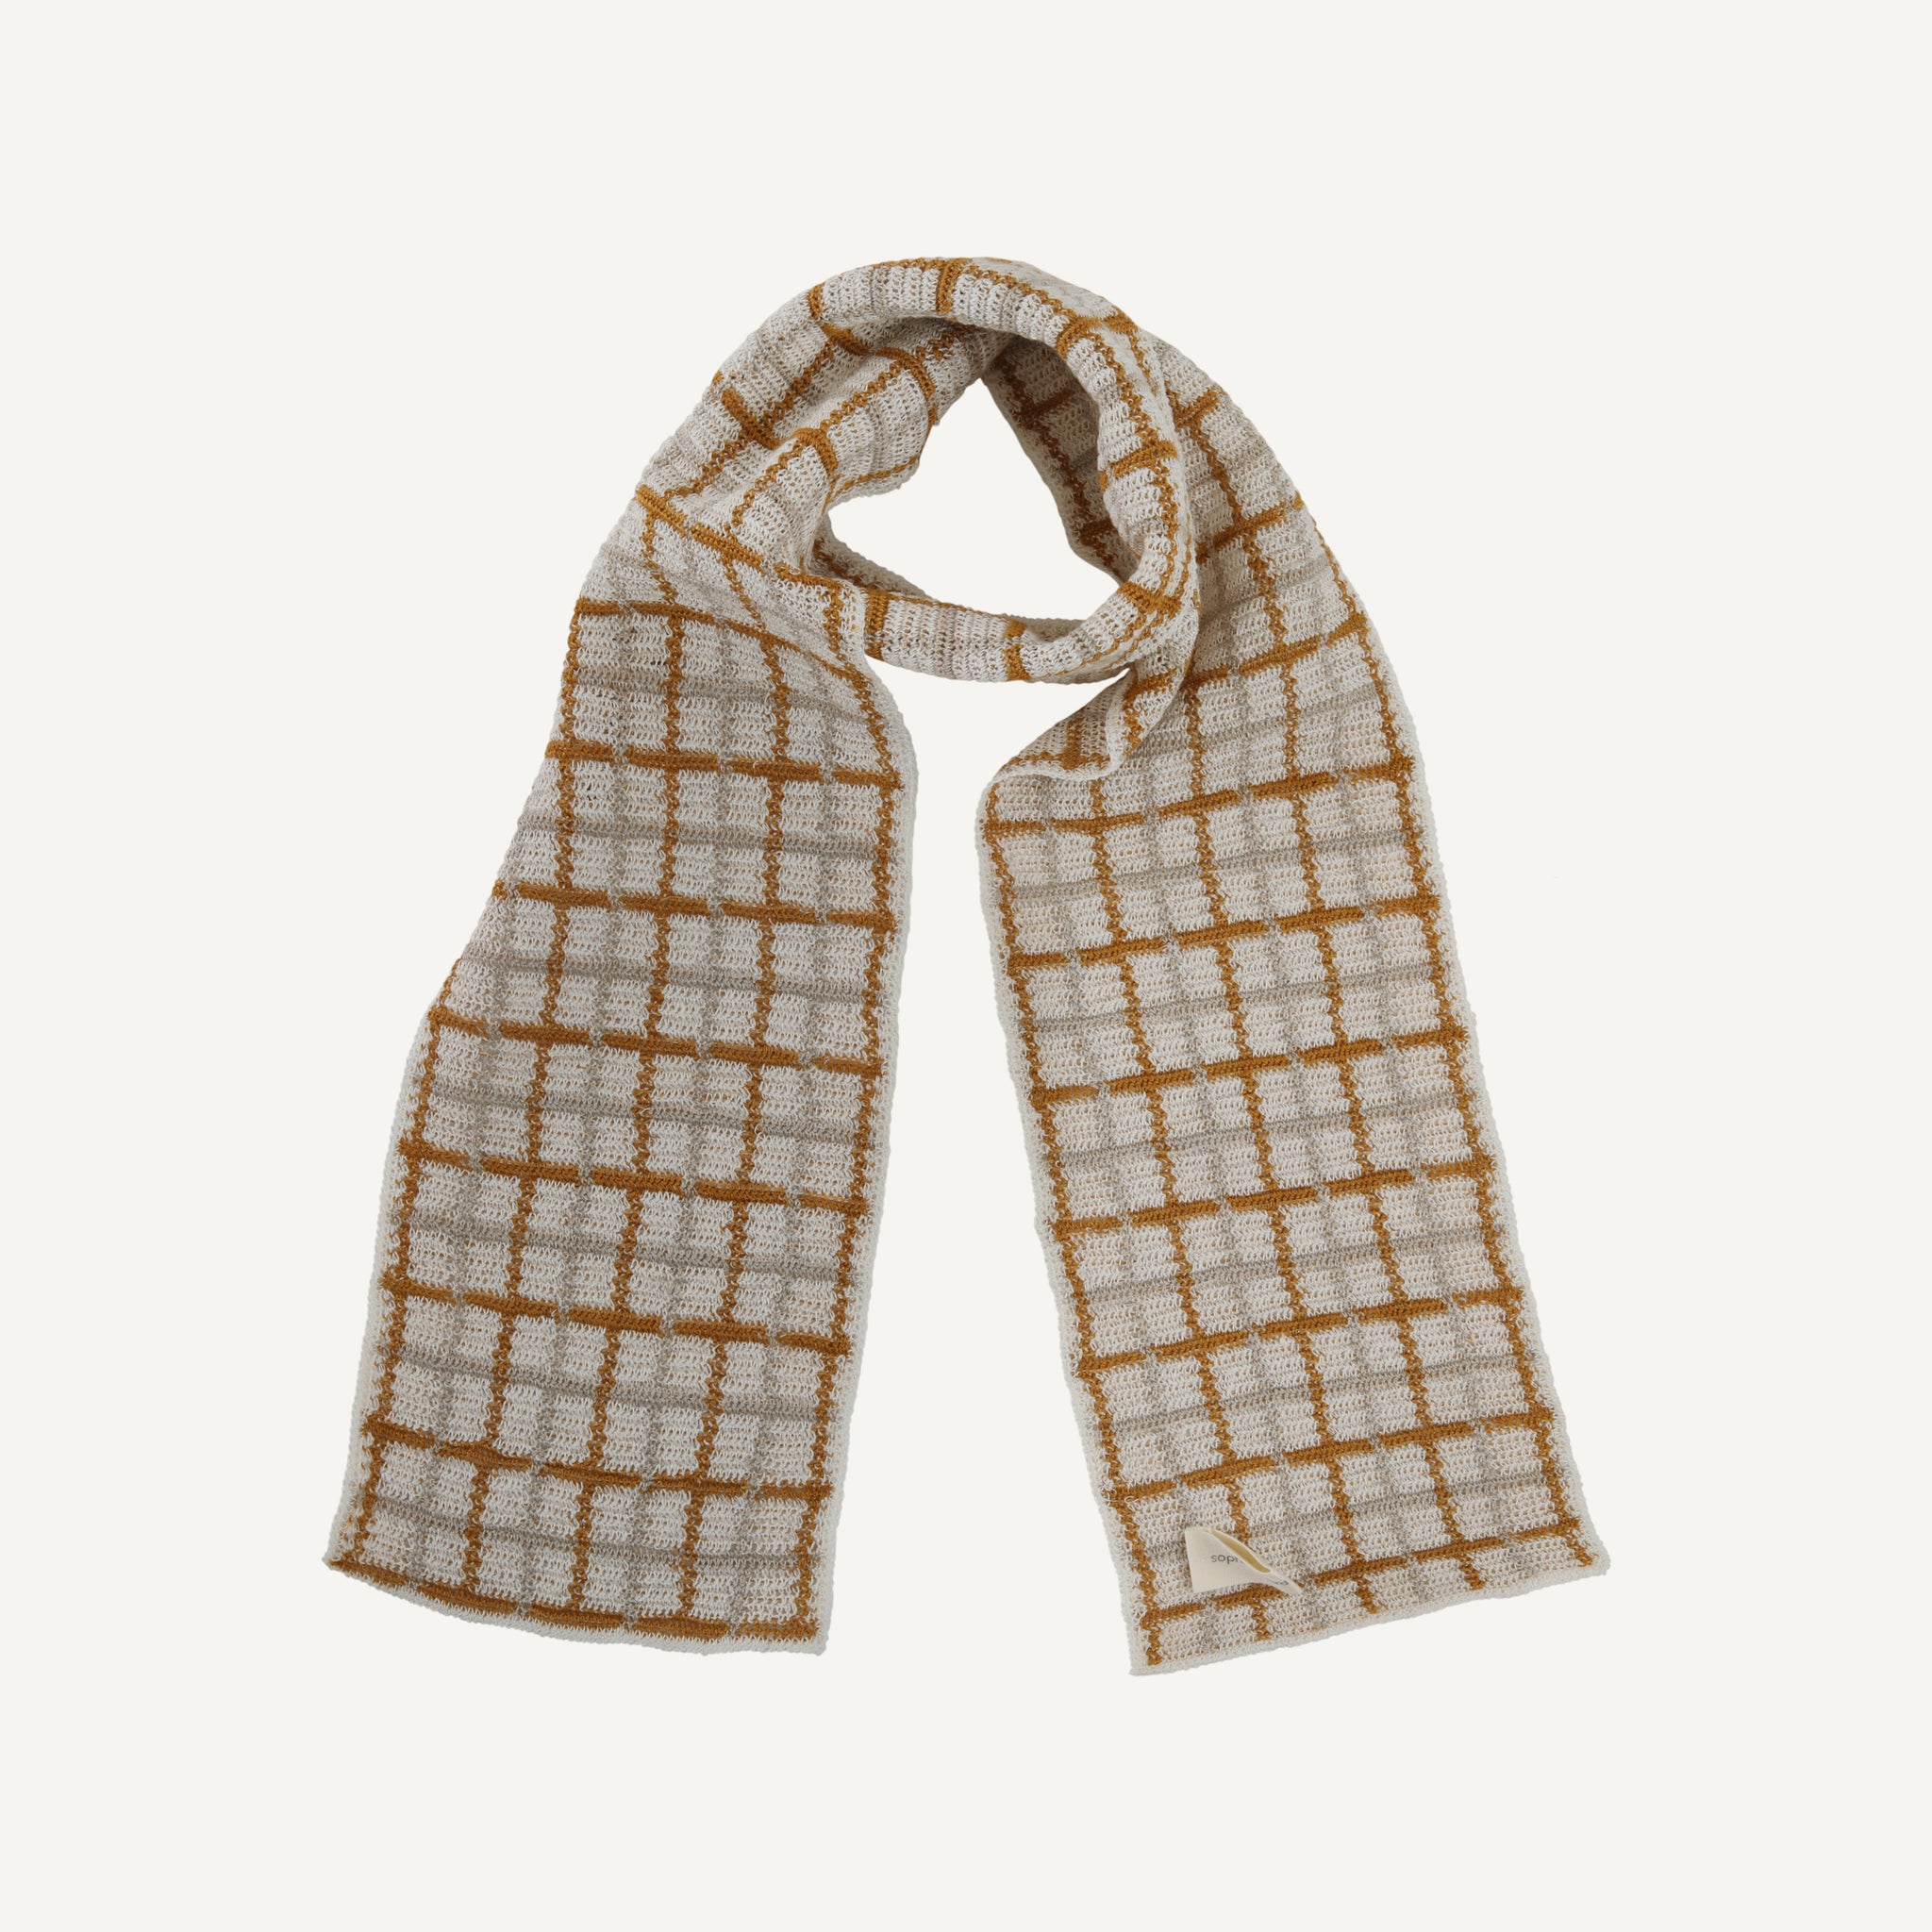 SOPHIE DIGARD HAND CROCHET NARROW LINEN CHECK SCARF